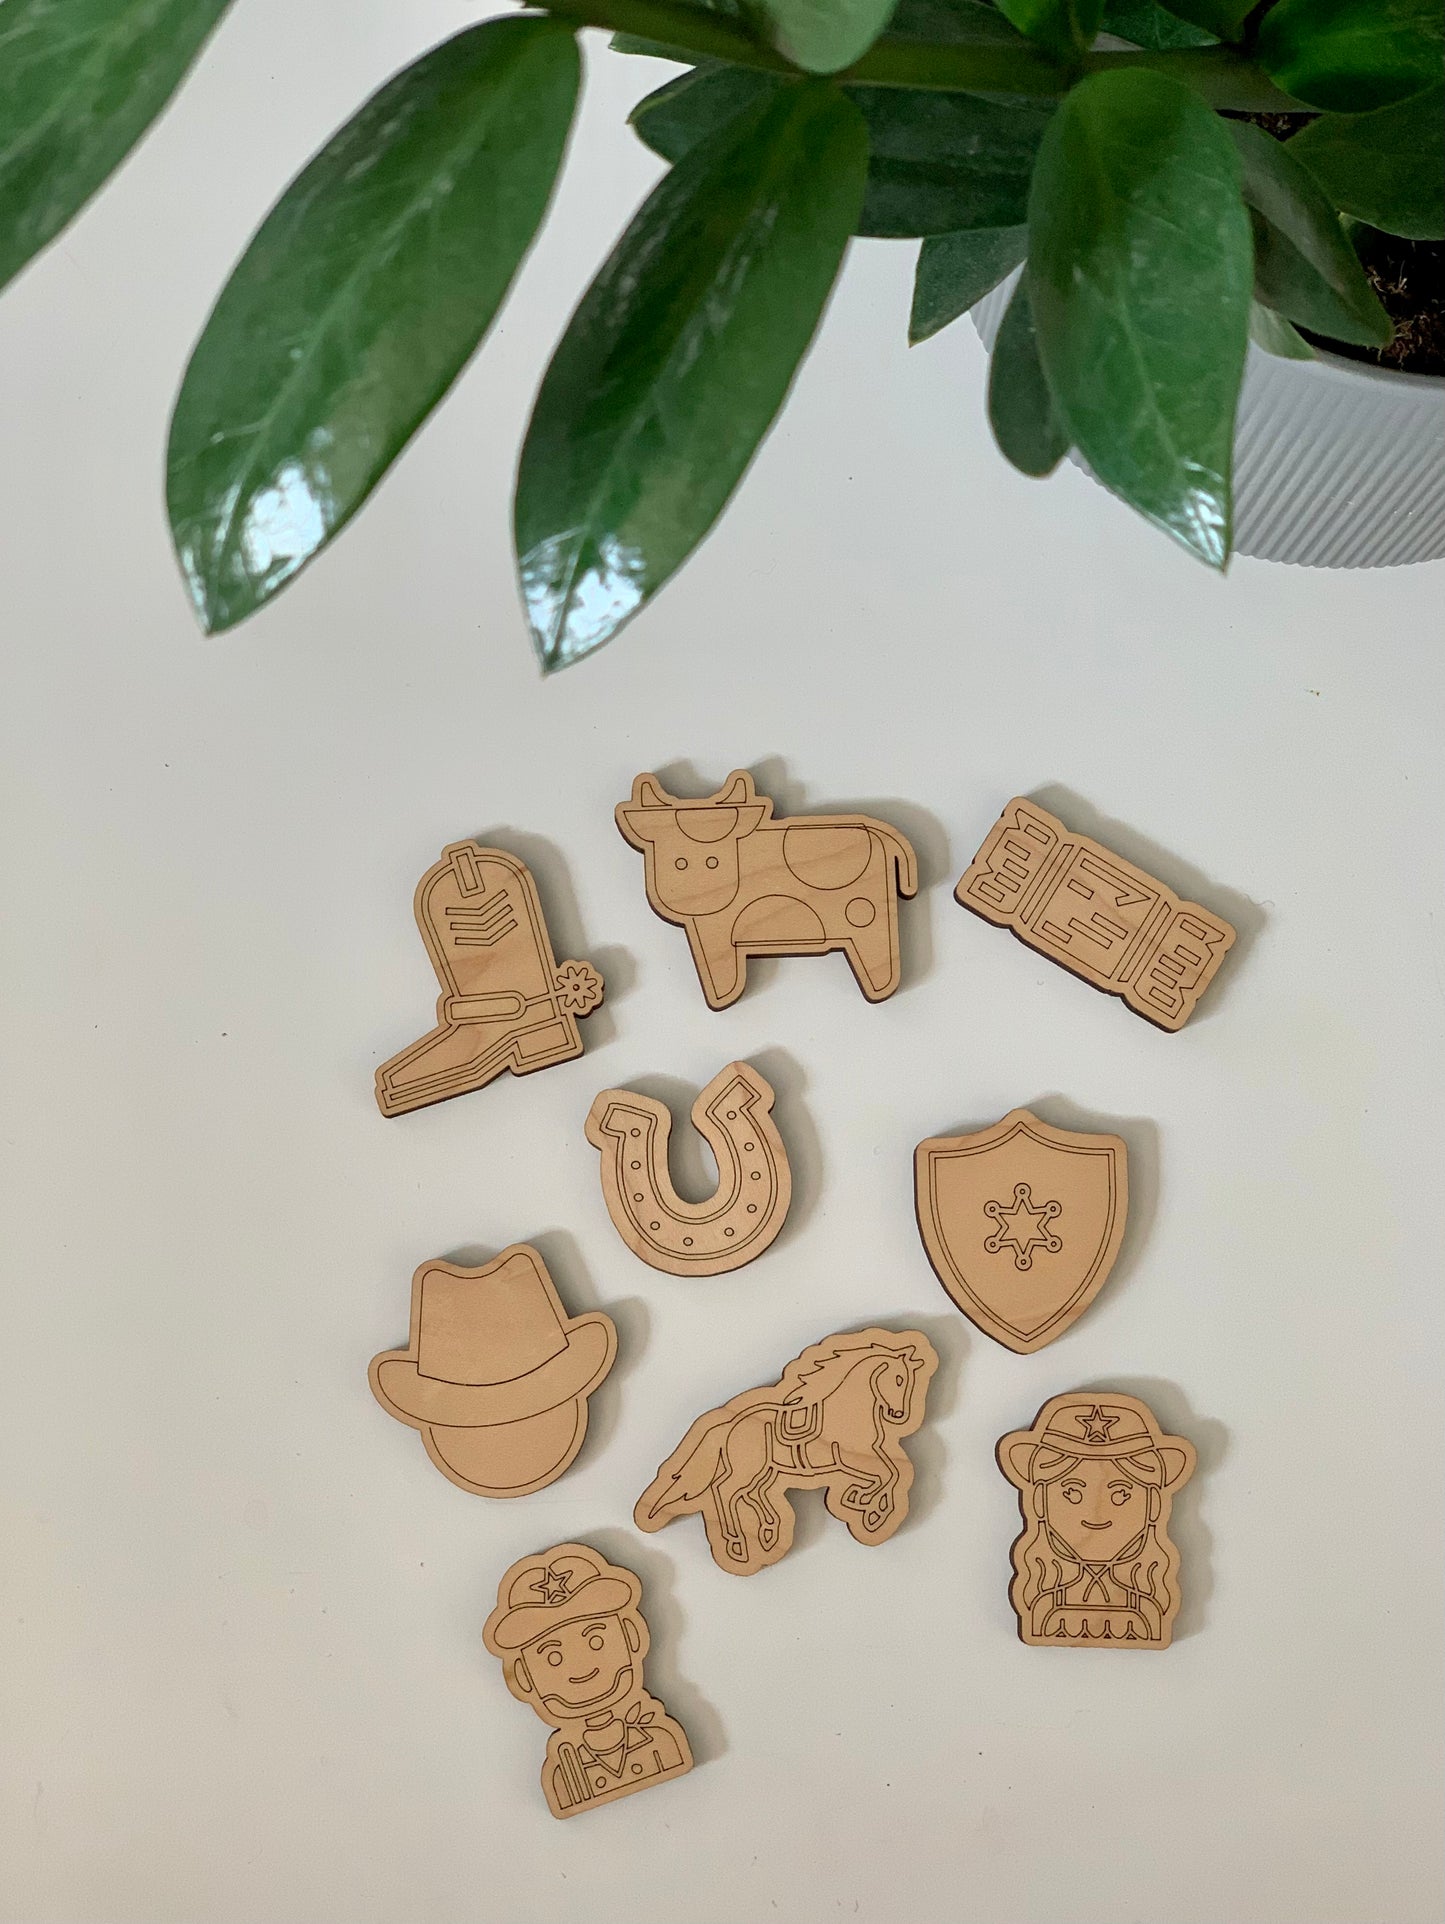 Western Themed Loose Parts